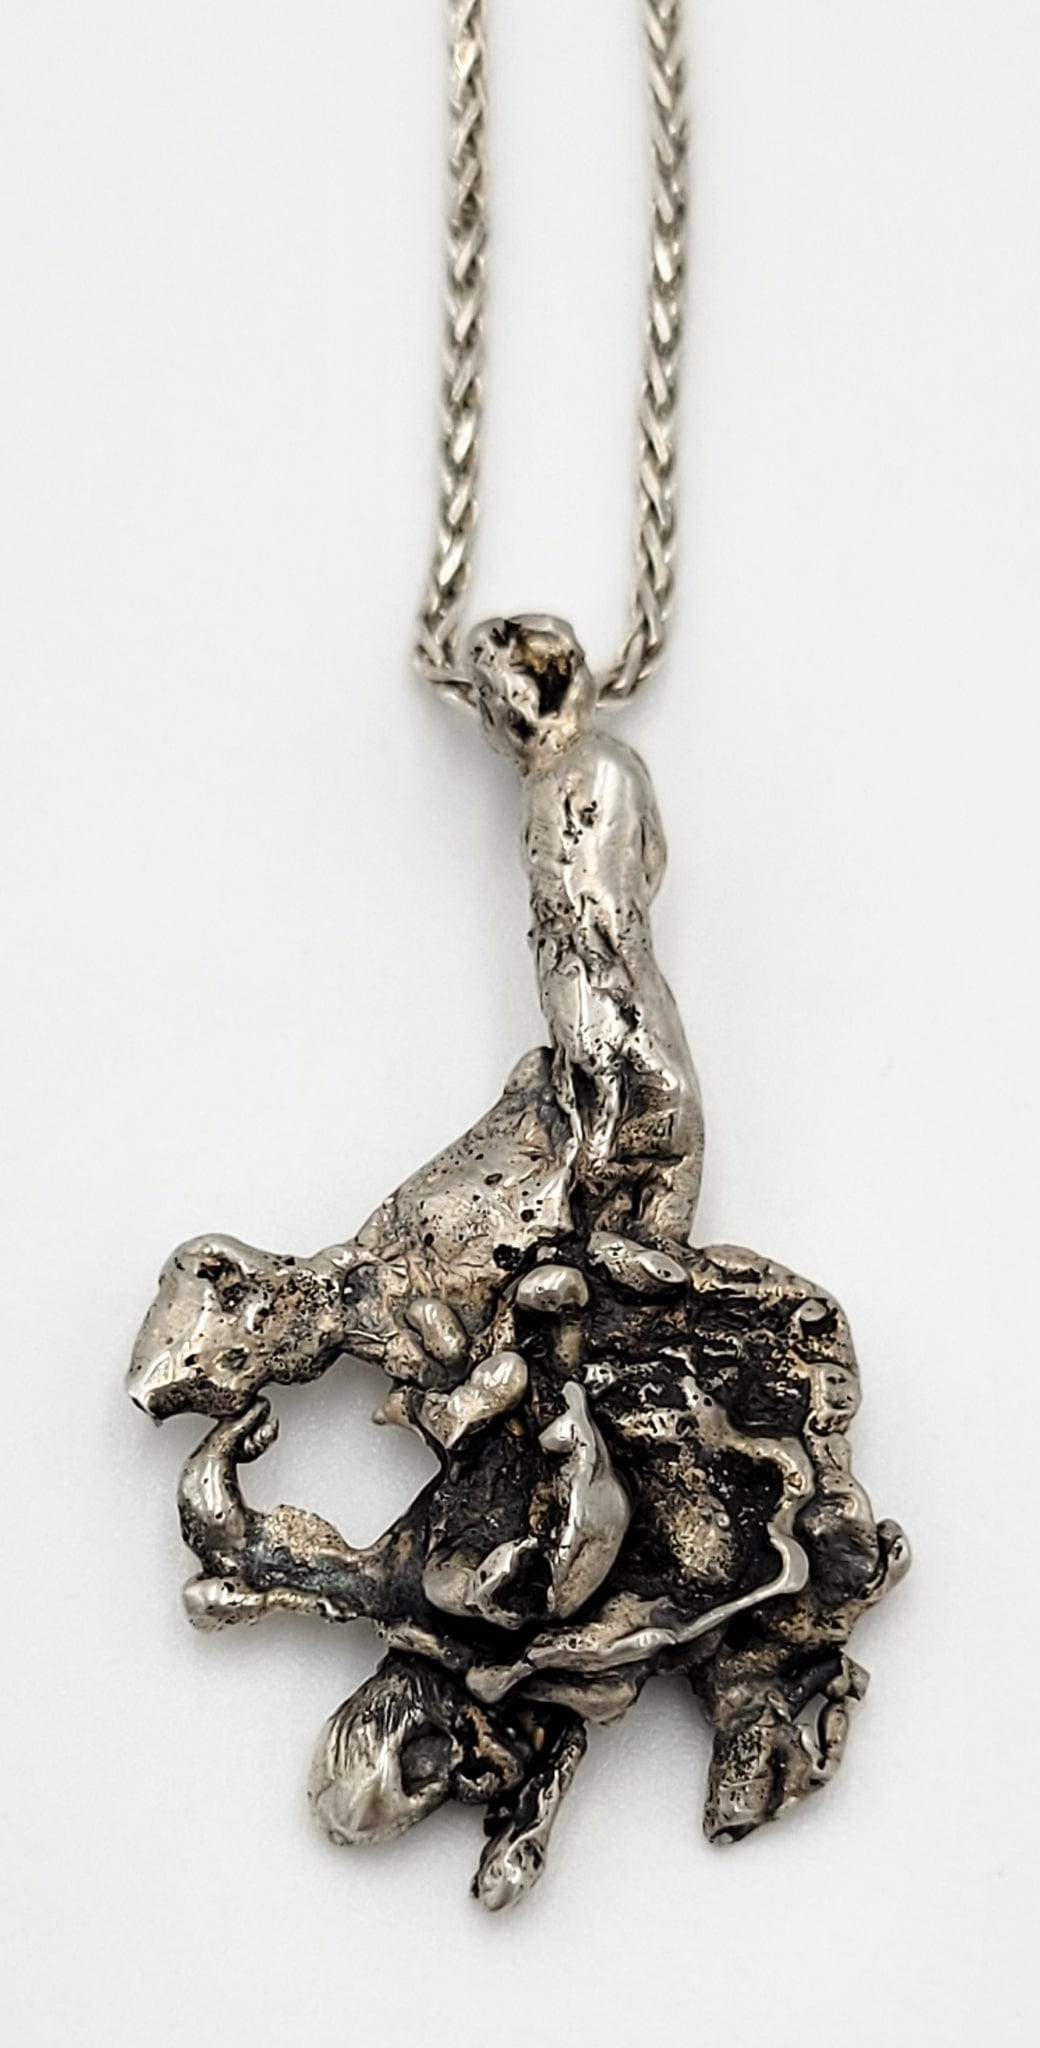 Brutalist Sterling Necklace Jewelry Artisan Sterling Silver Modernist Brutalist Tree Roots Pendant Necklace Circa 1960s